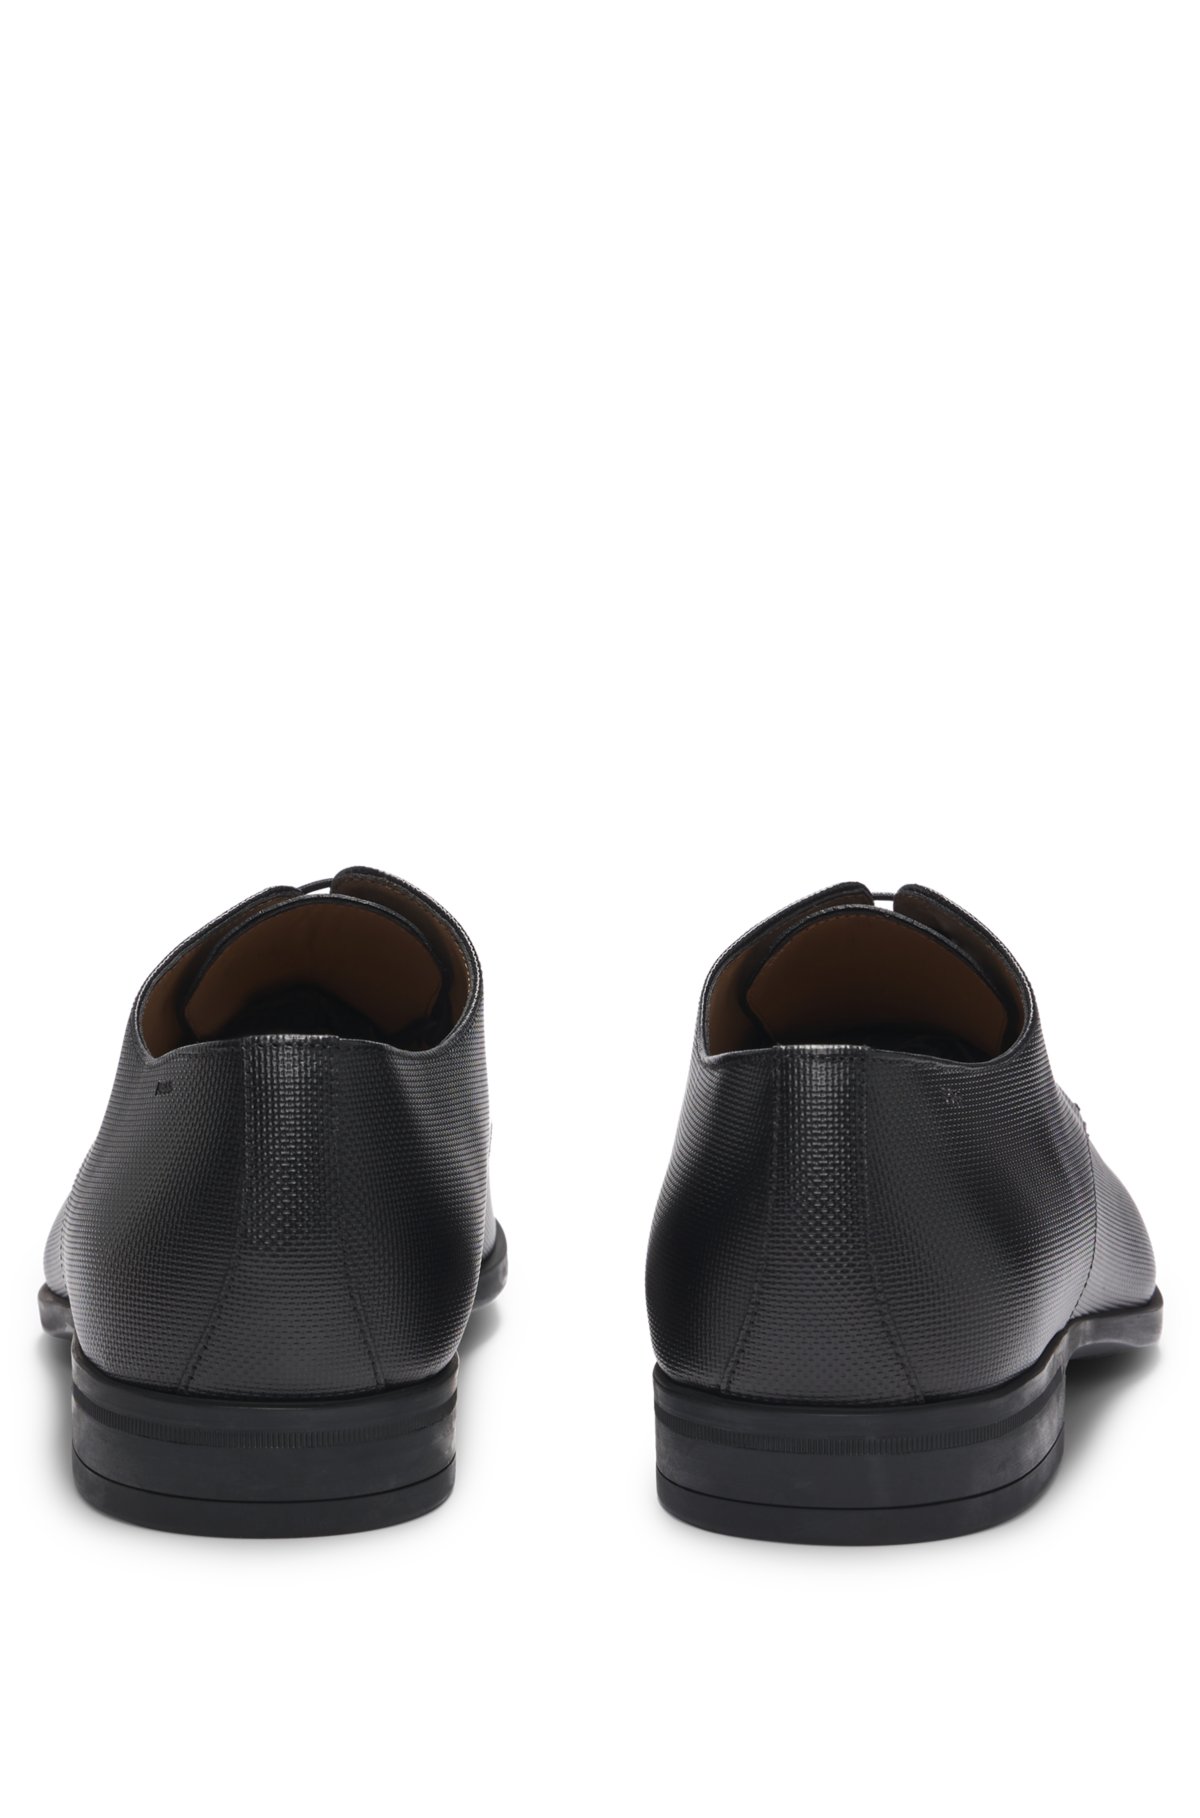 BOSS - Derby shoes in structured leather with padded insole